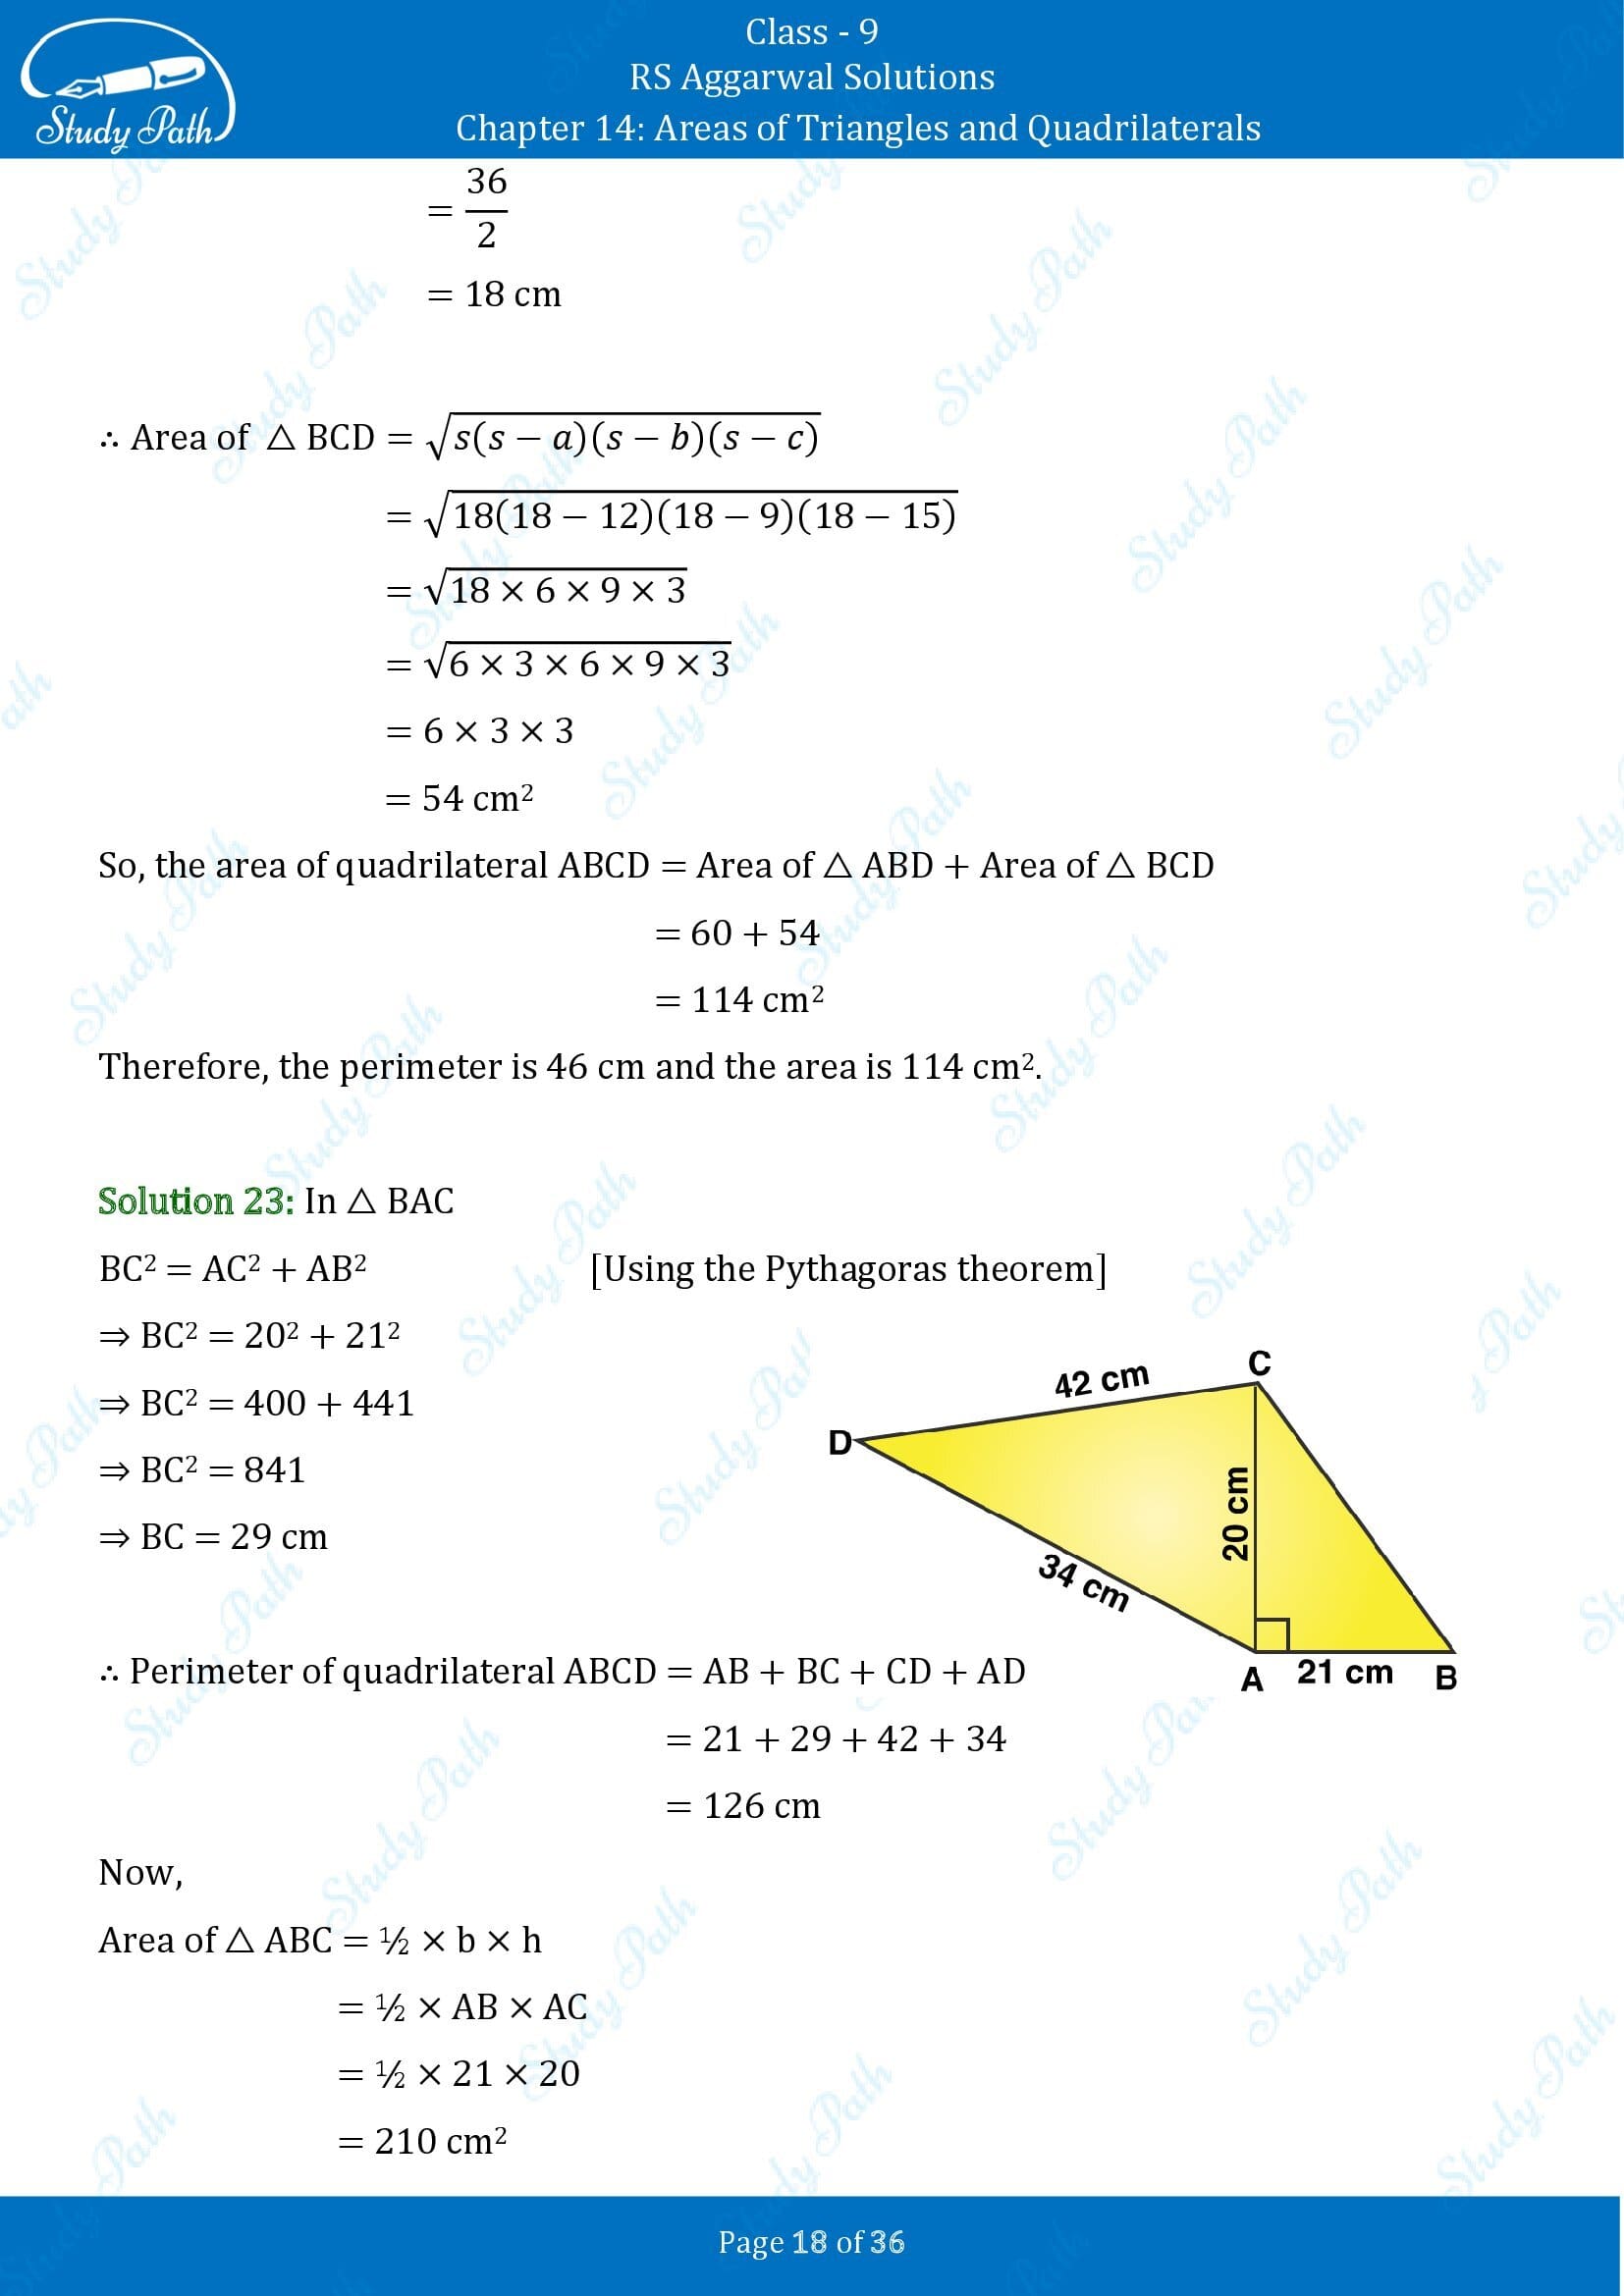 RS Aggarwal Solutions Class 9 Chapter 14 Areas of Triangles and Quadrilaterals Exercise 14 00018